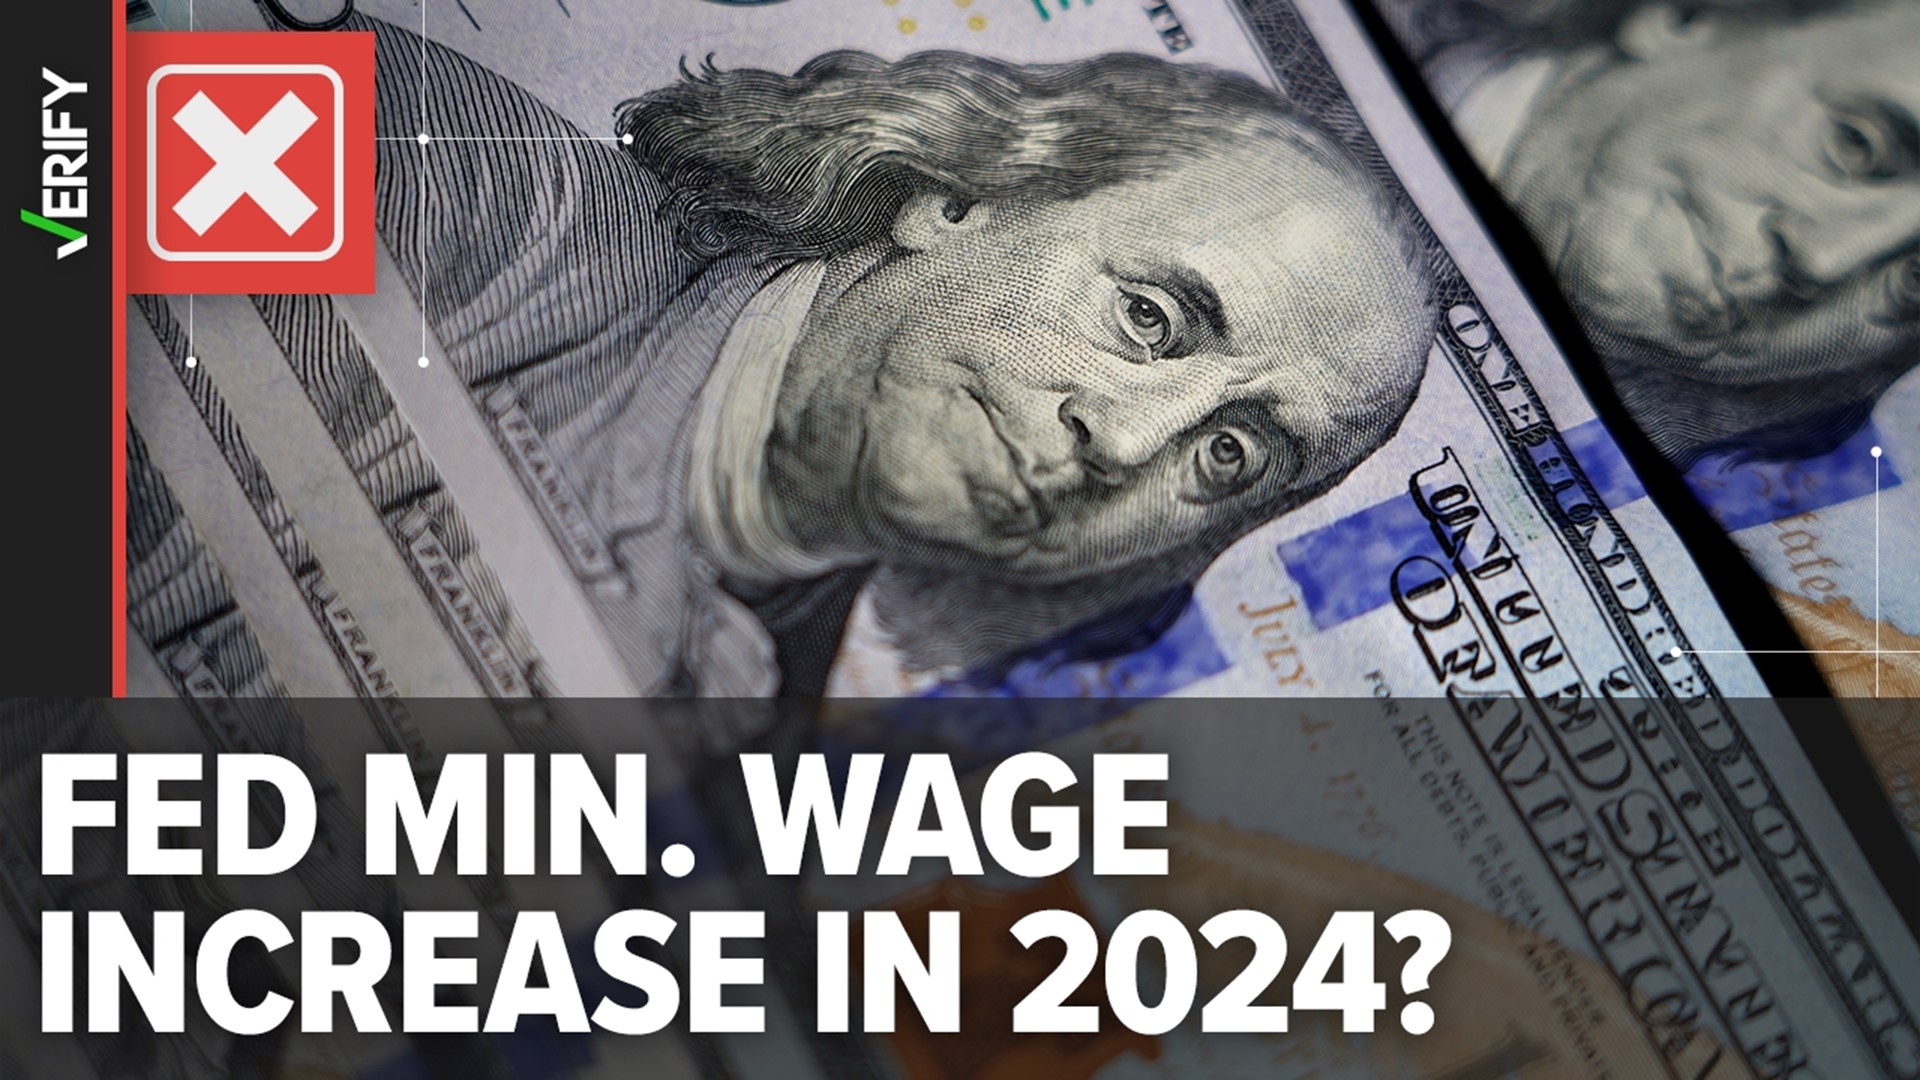 No, the federal minimum wage is not scheduled to increase in 2024